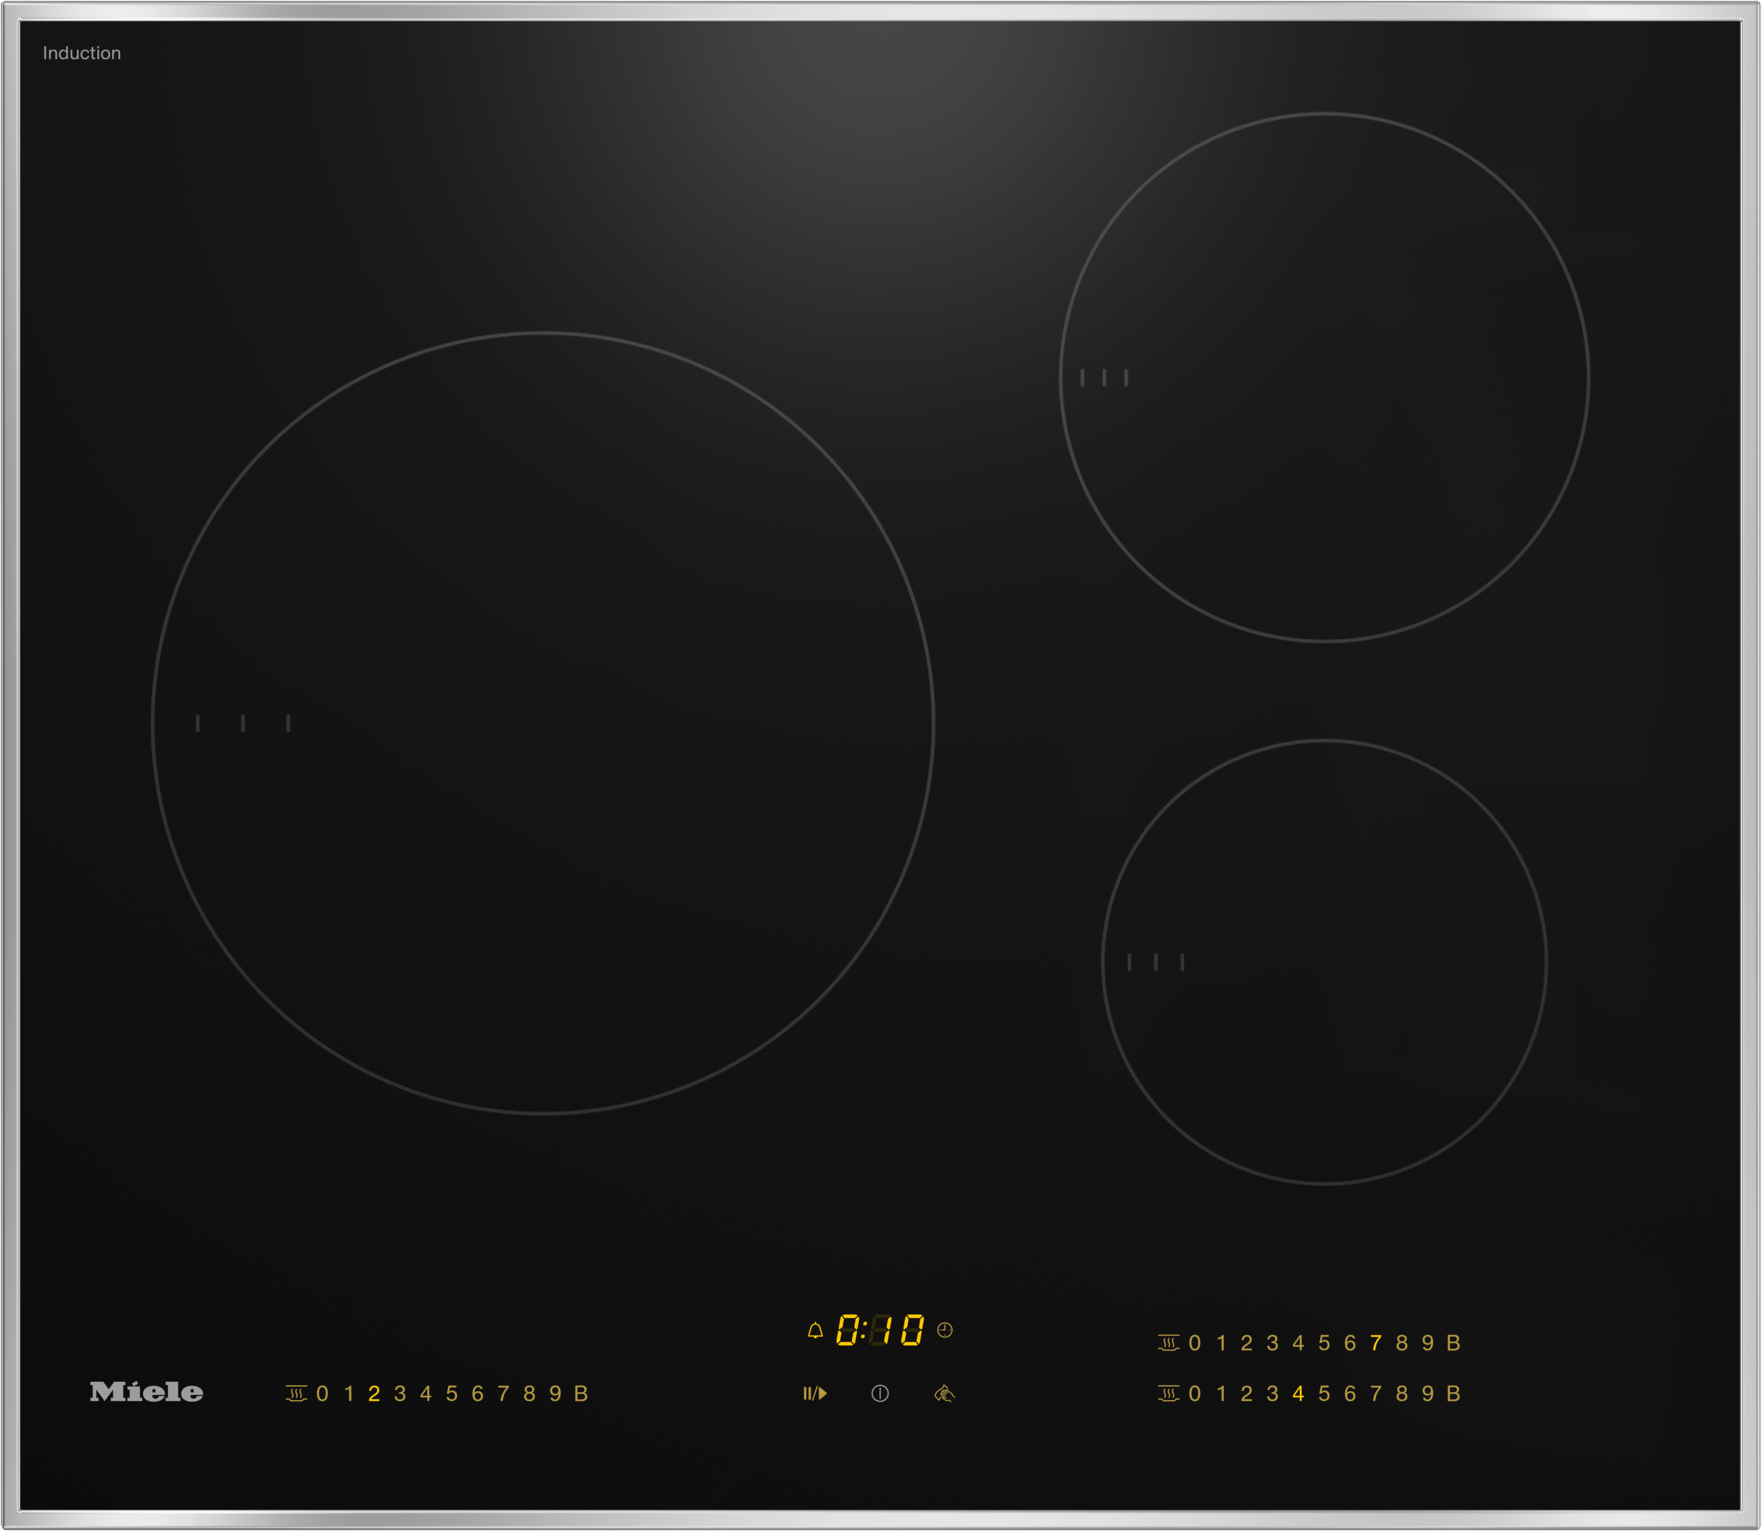 Miele KM7720FR Km 7720 Fr - Induction Cooktop With 3 Round Cooking Zones